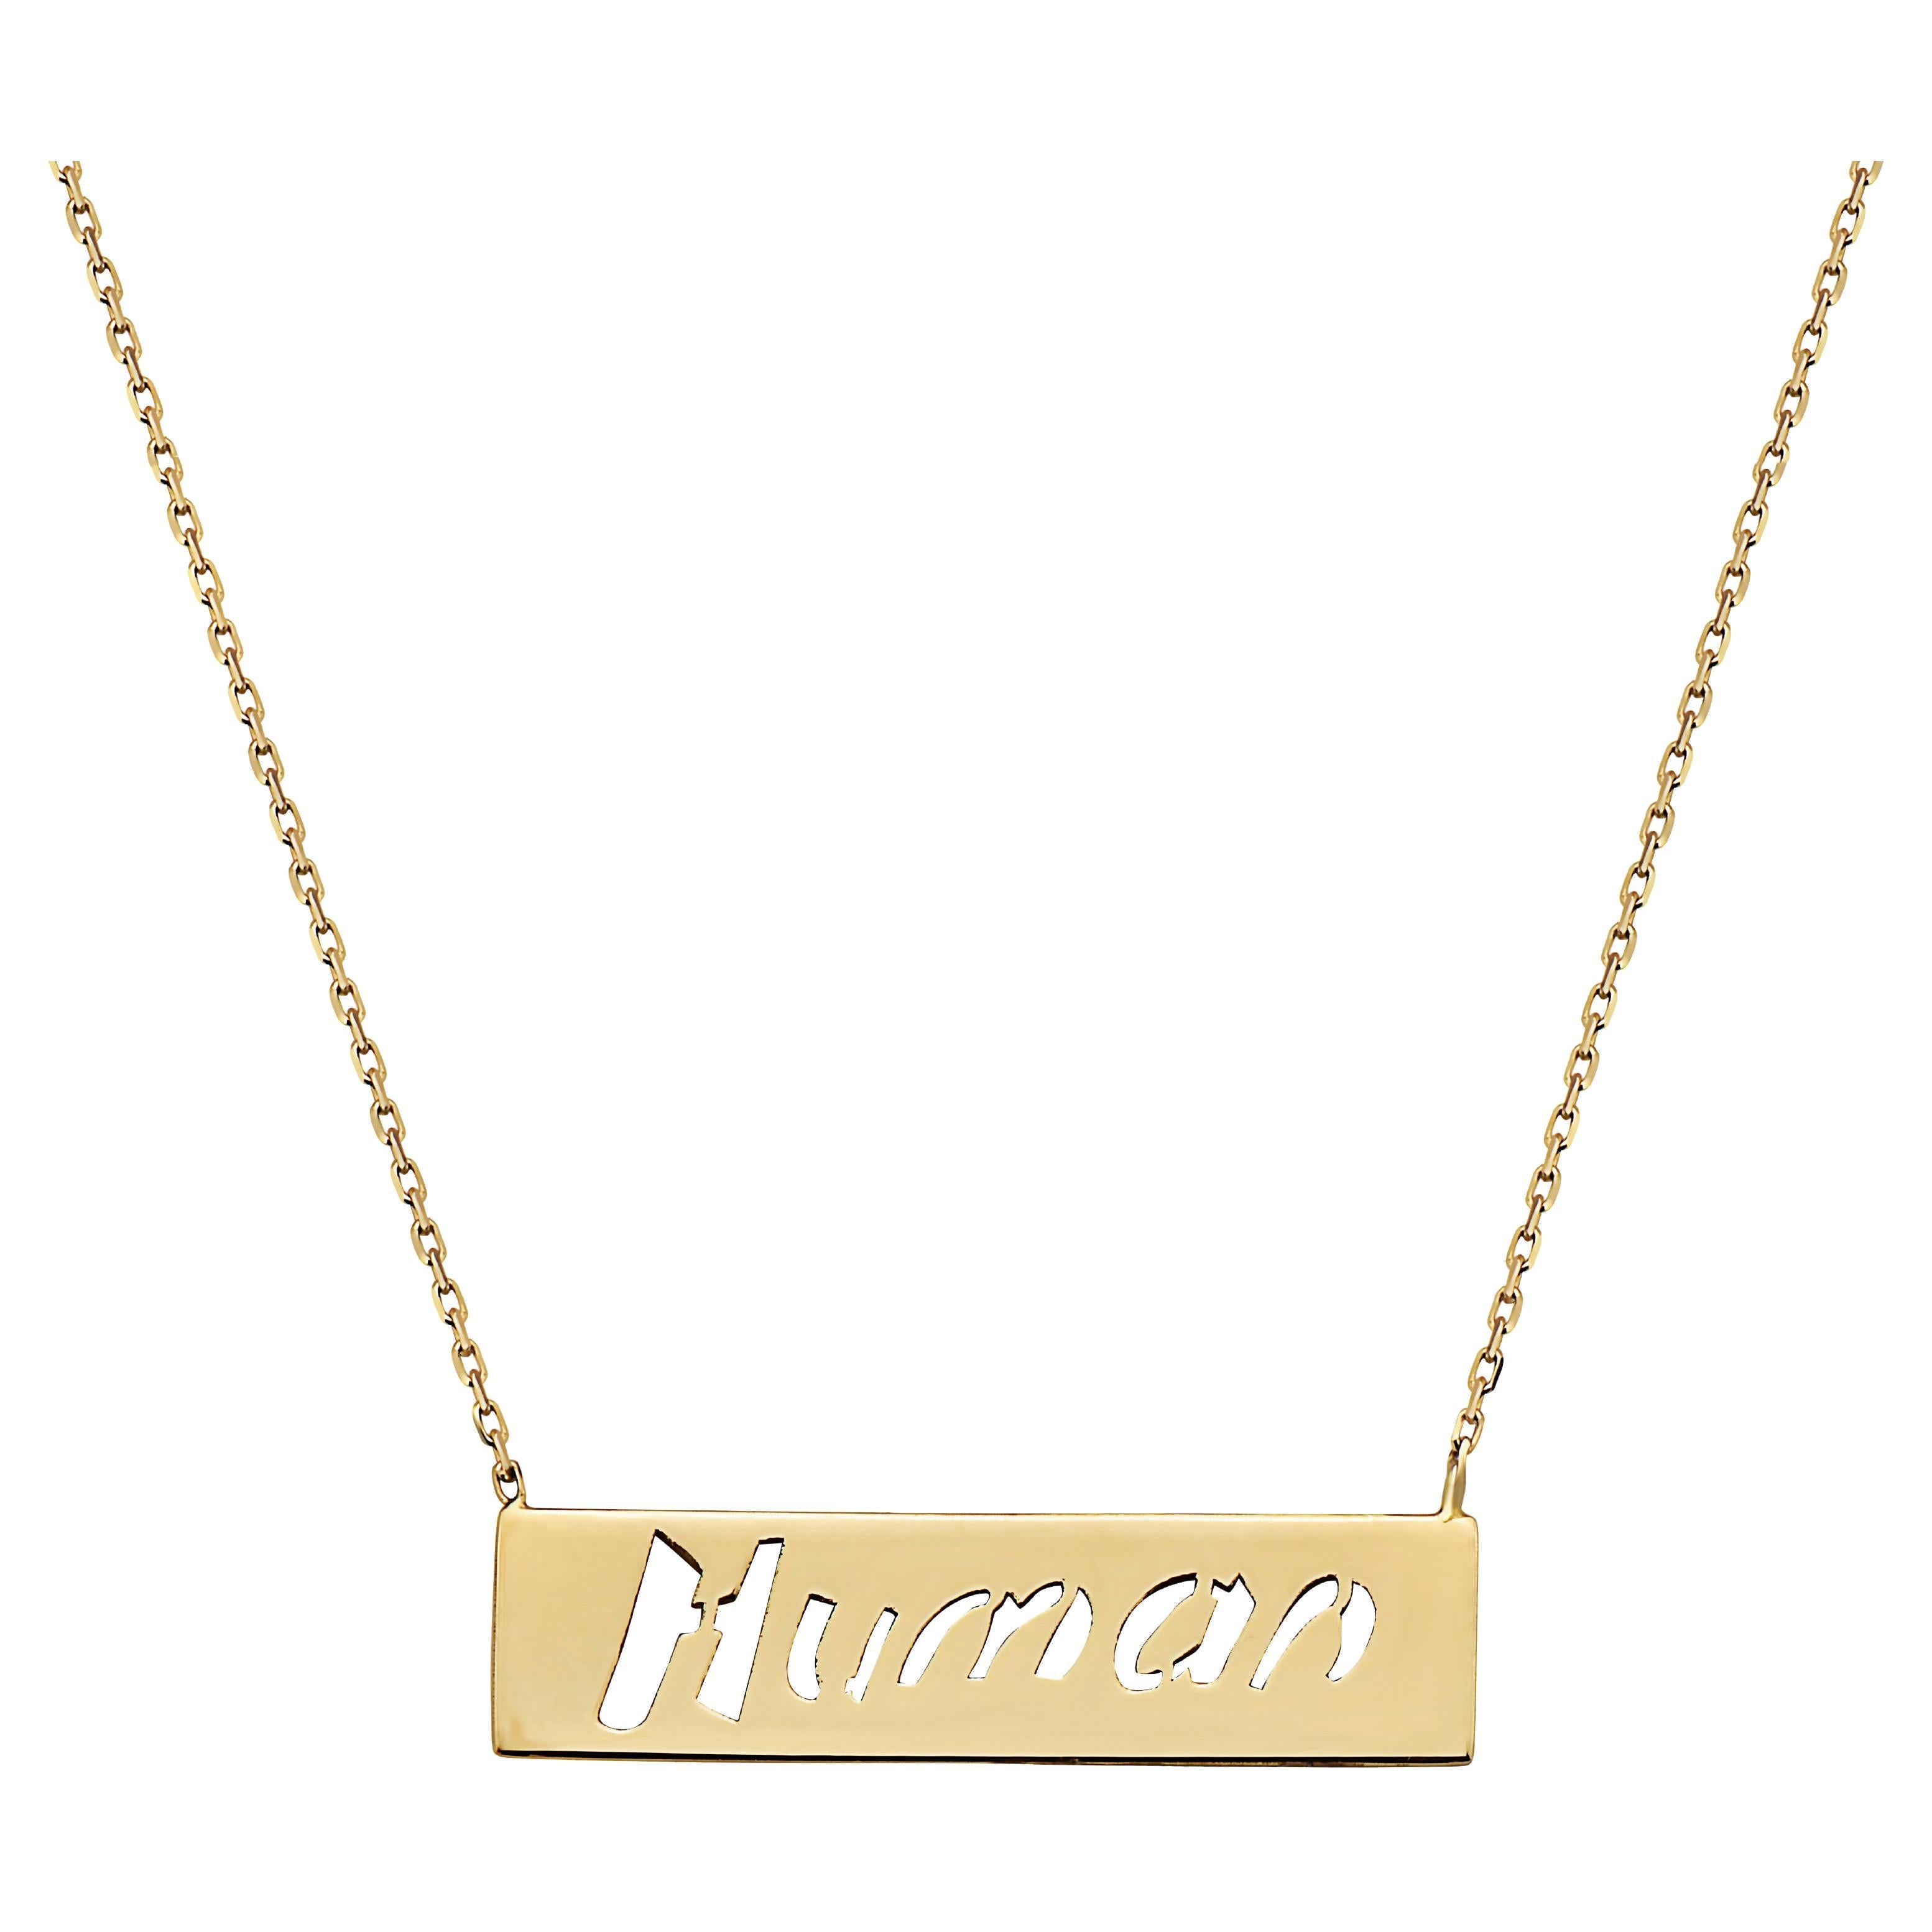 Human Bar Necklace For Sale